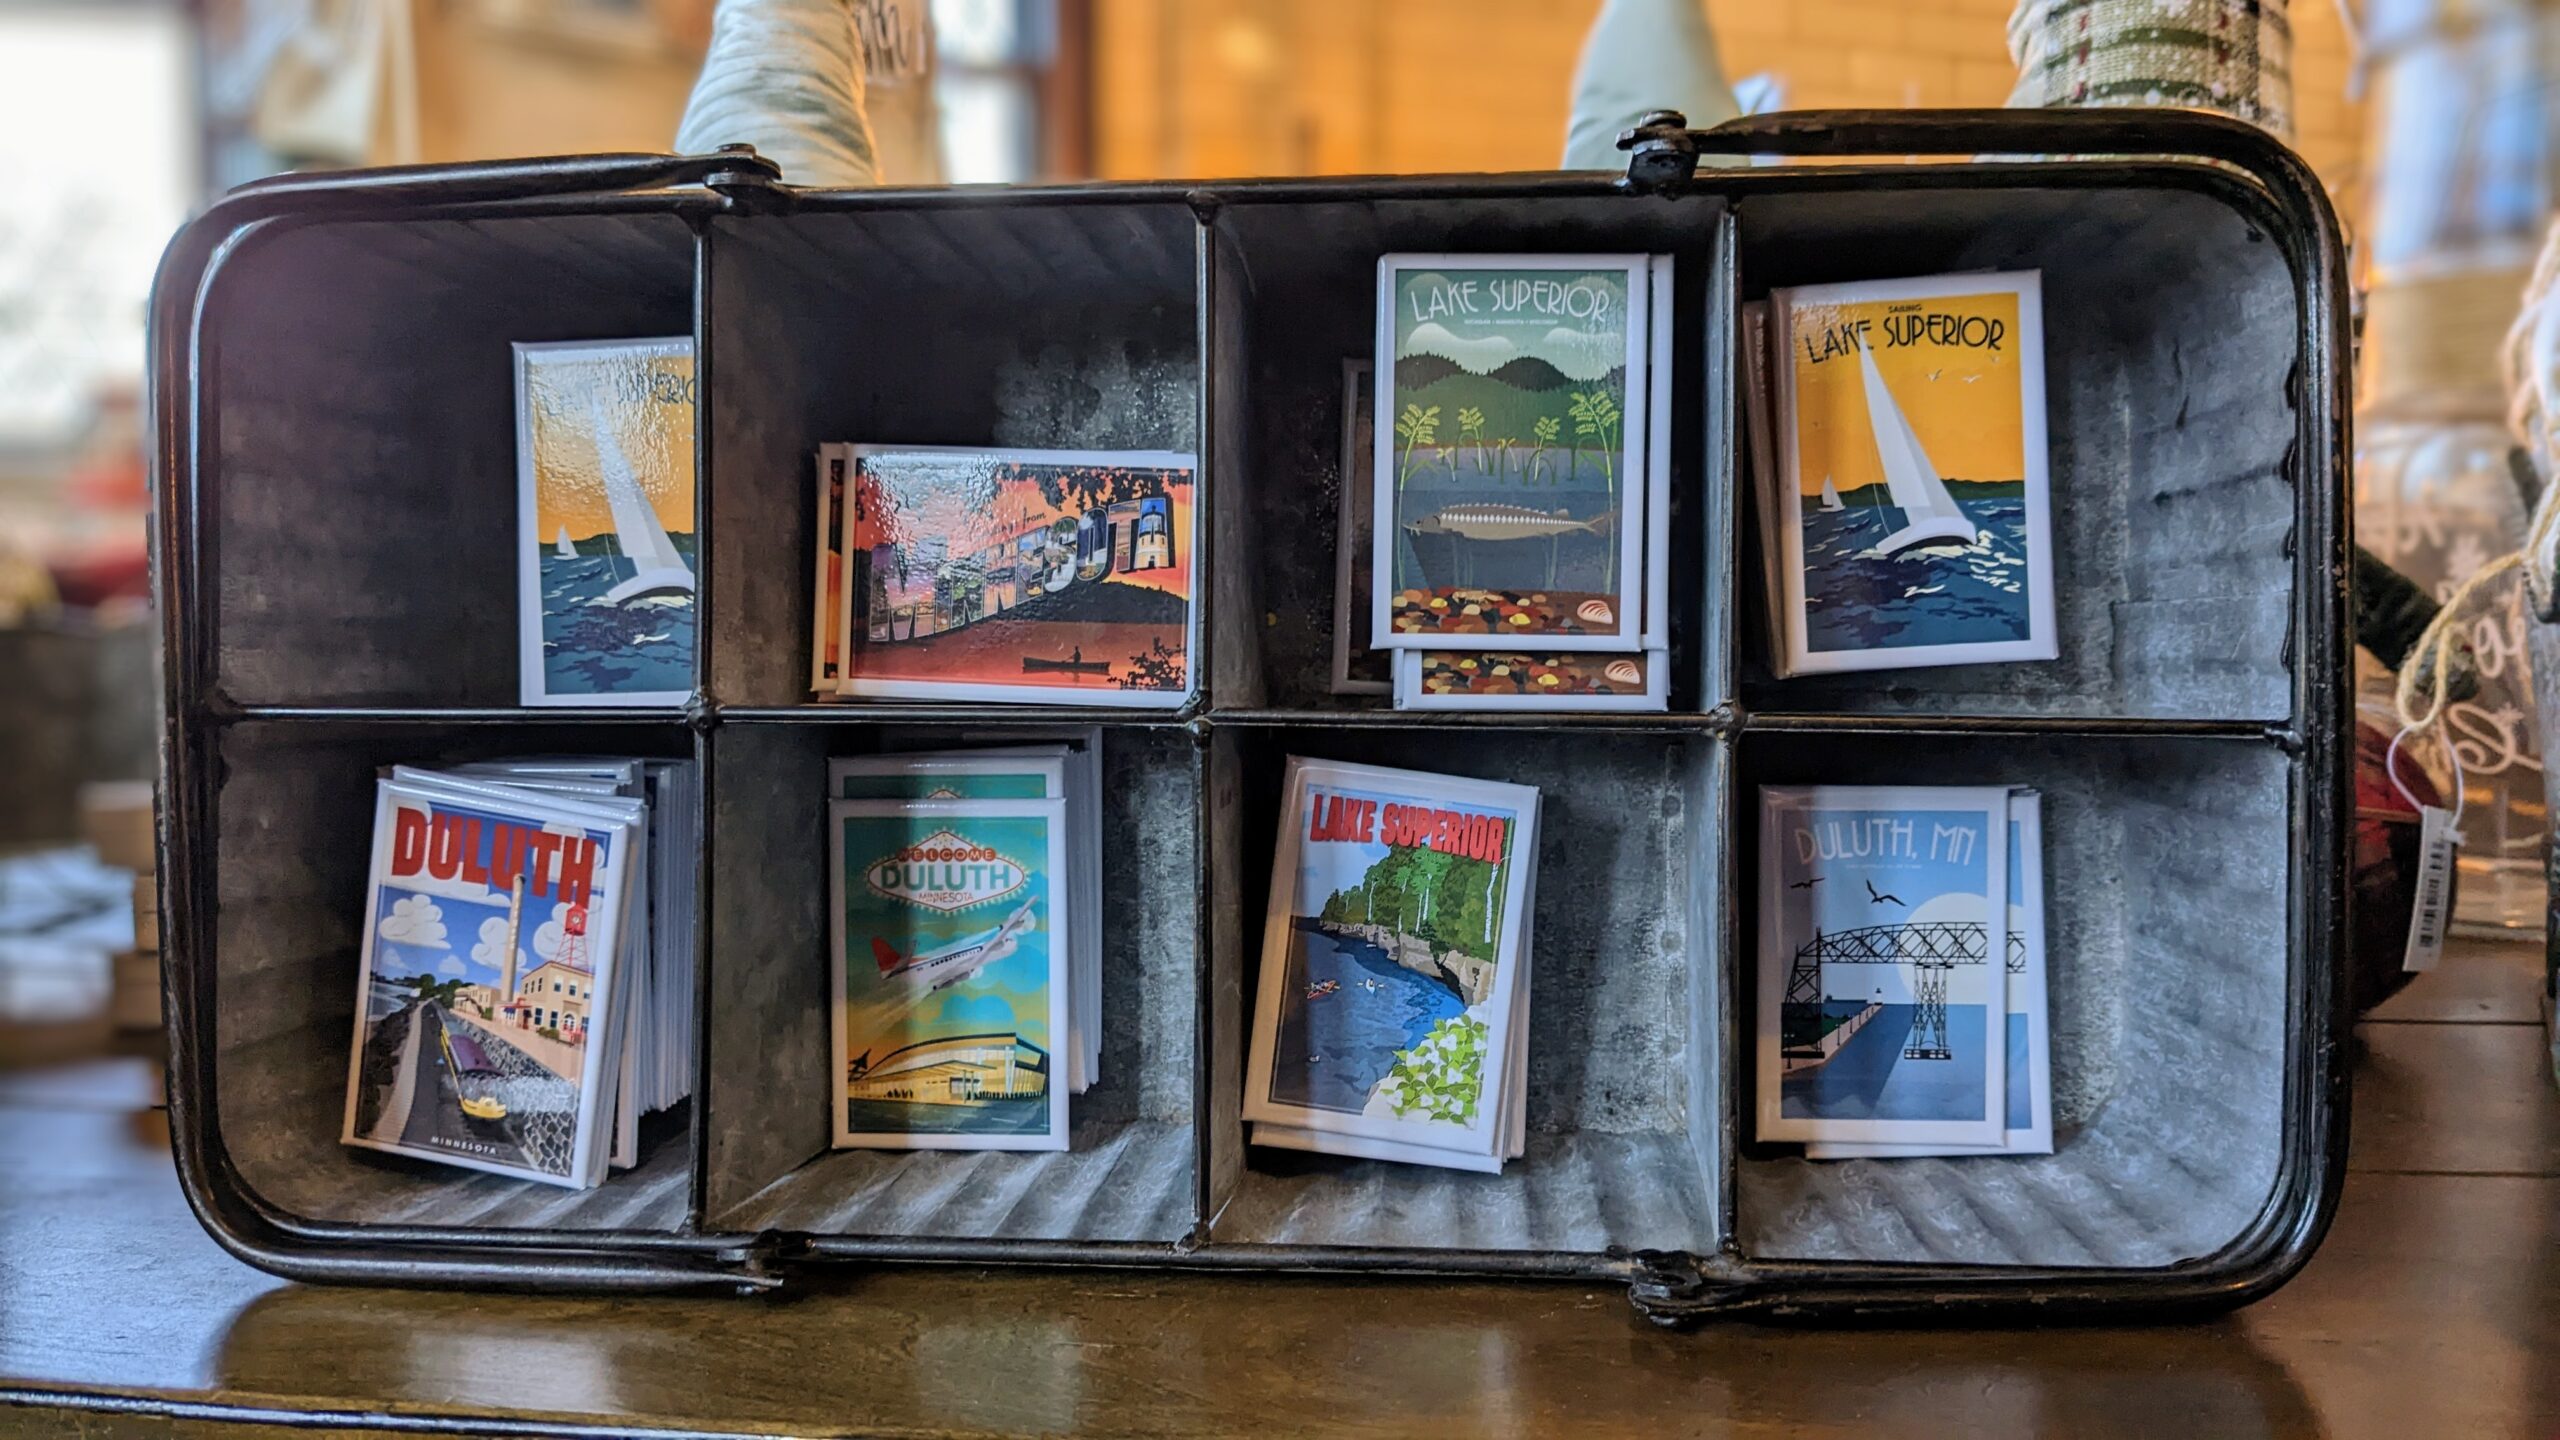 Magnets of various Duluth attractions sit in a metal tin with cubbies on a wooden desk.